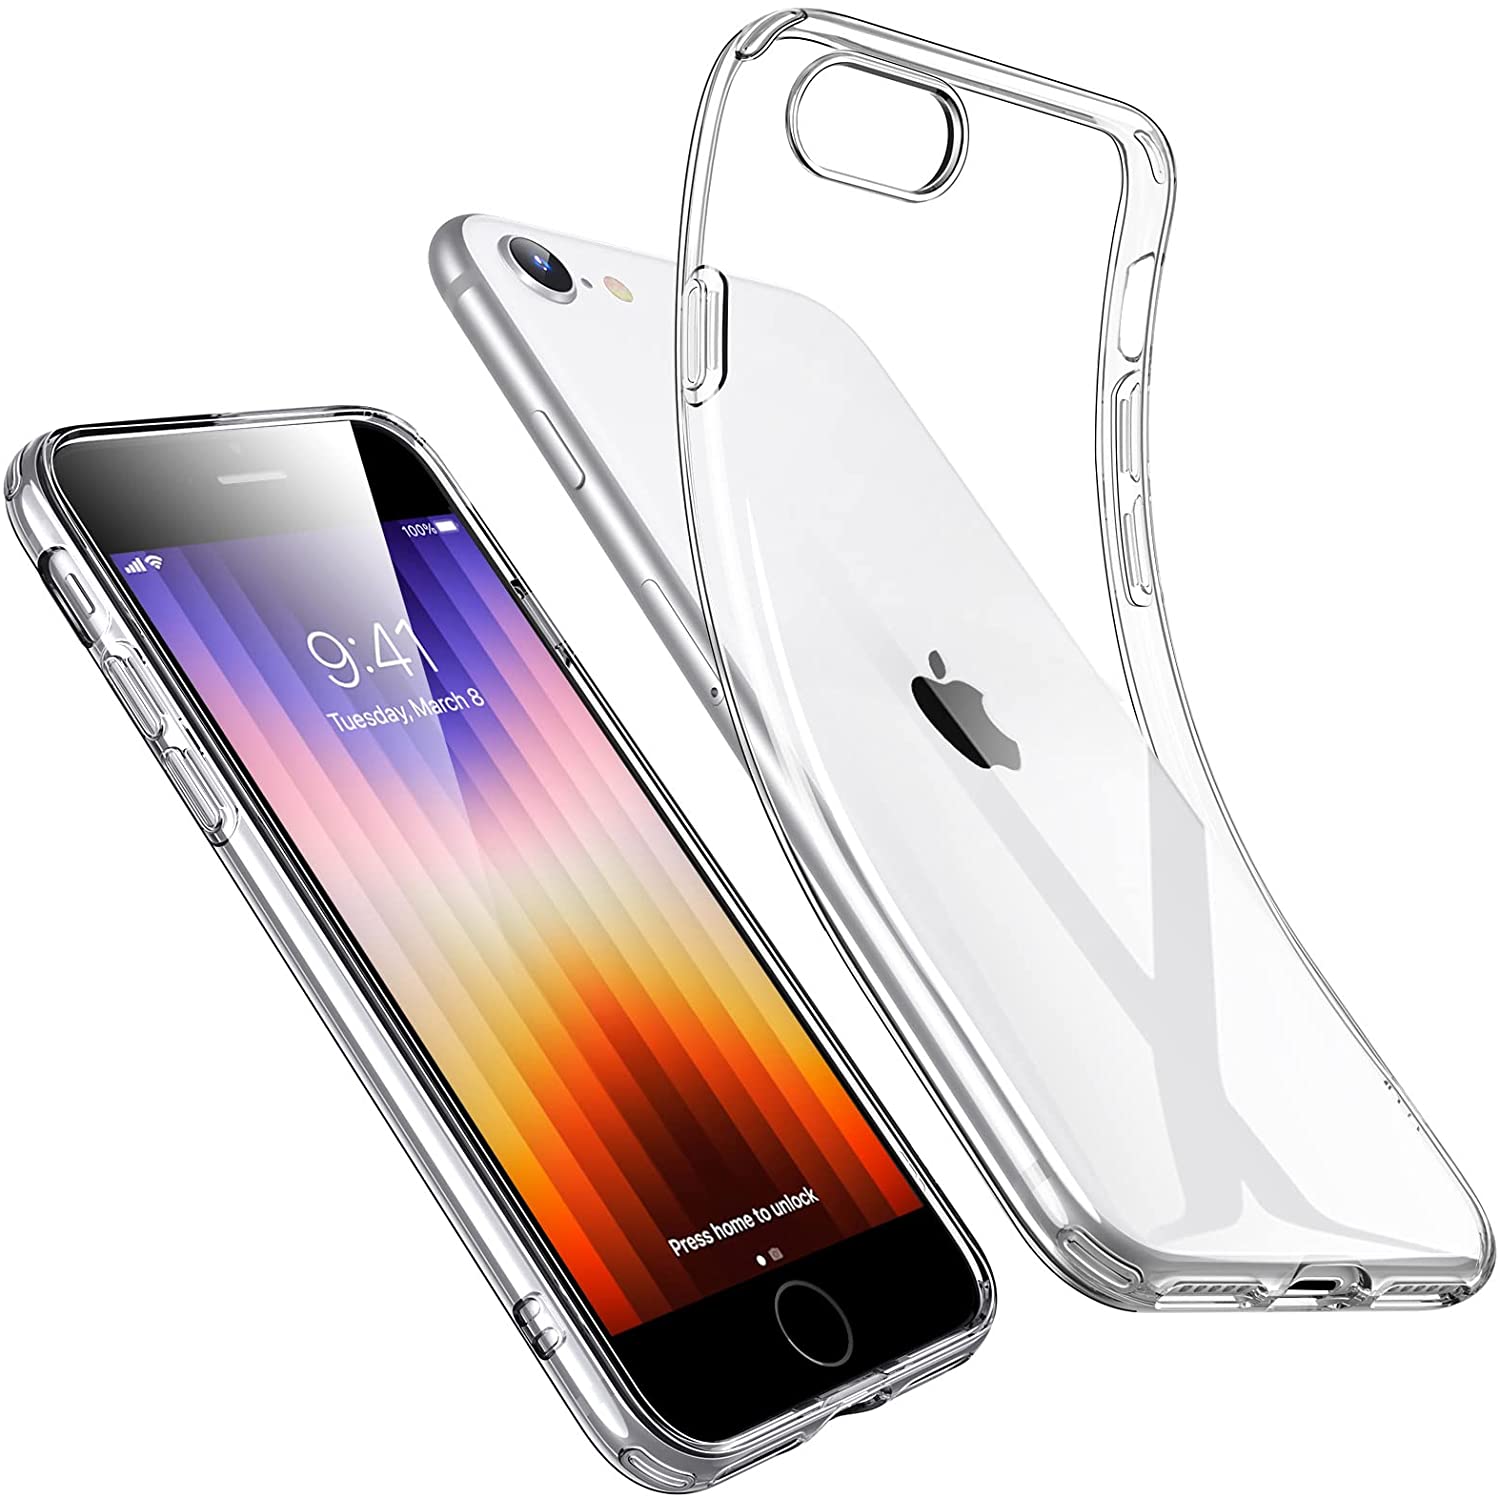 Clear Gel case for iPhone 7 / 8 / SE